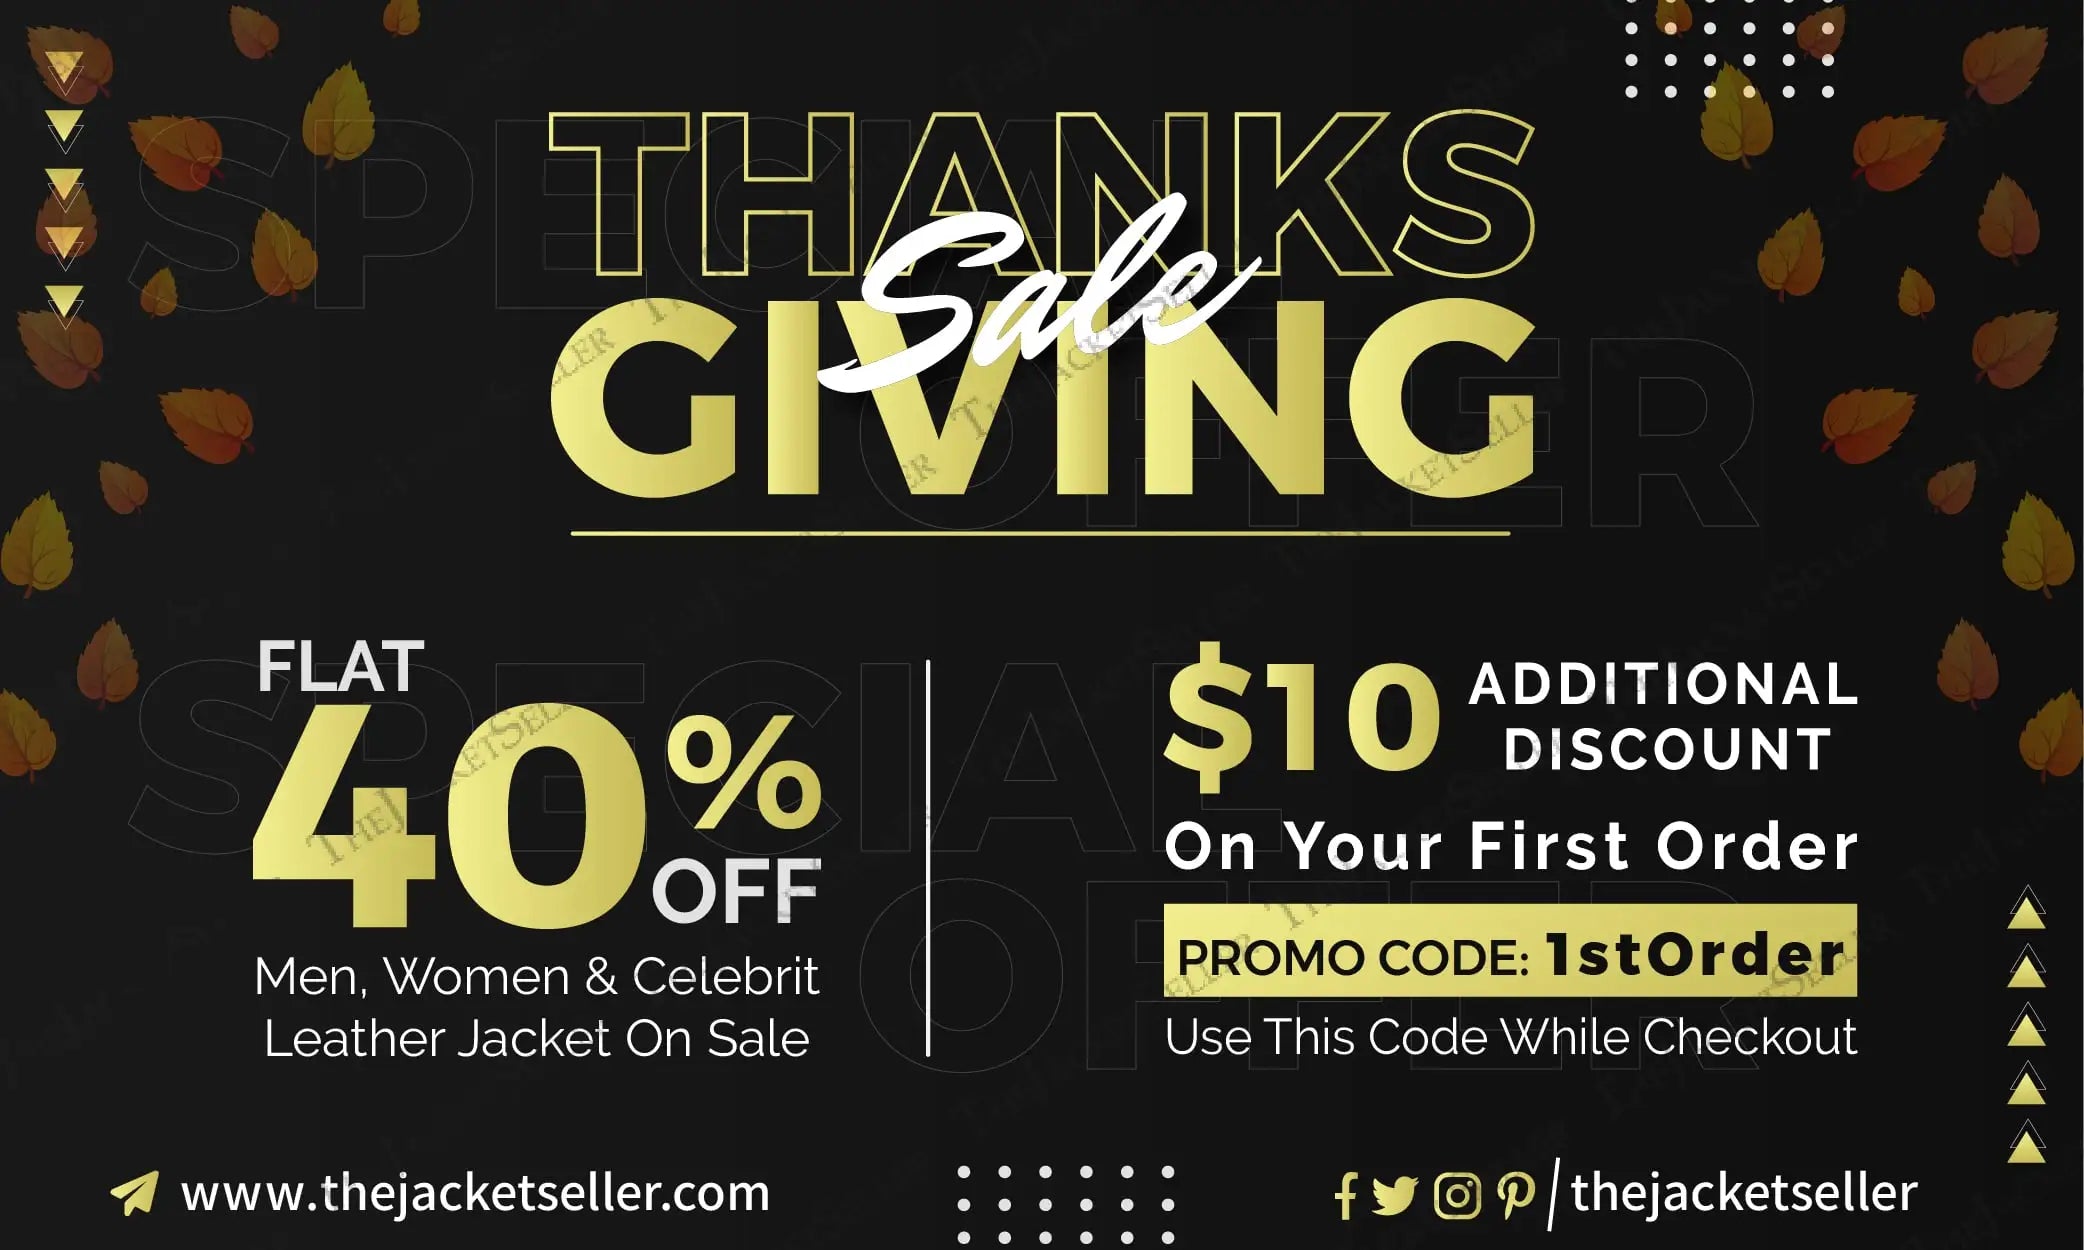 Men and women leather jackets Thanksgiving day sale by the jacket seller